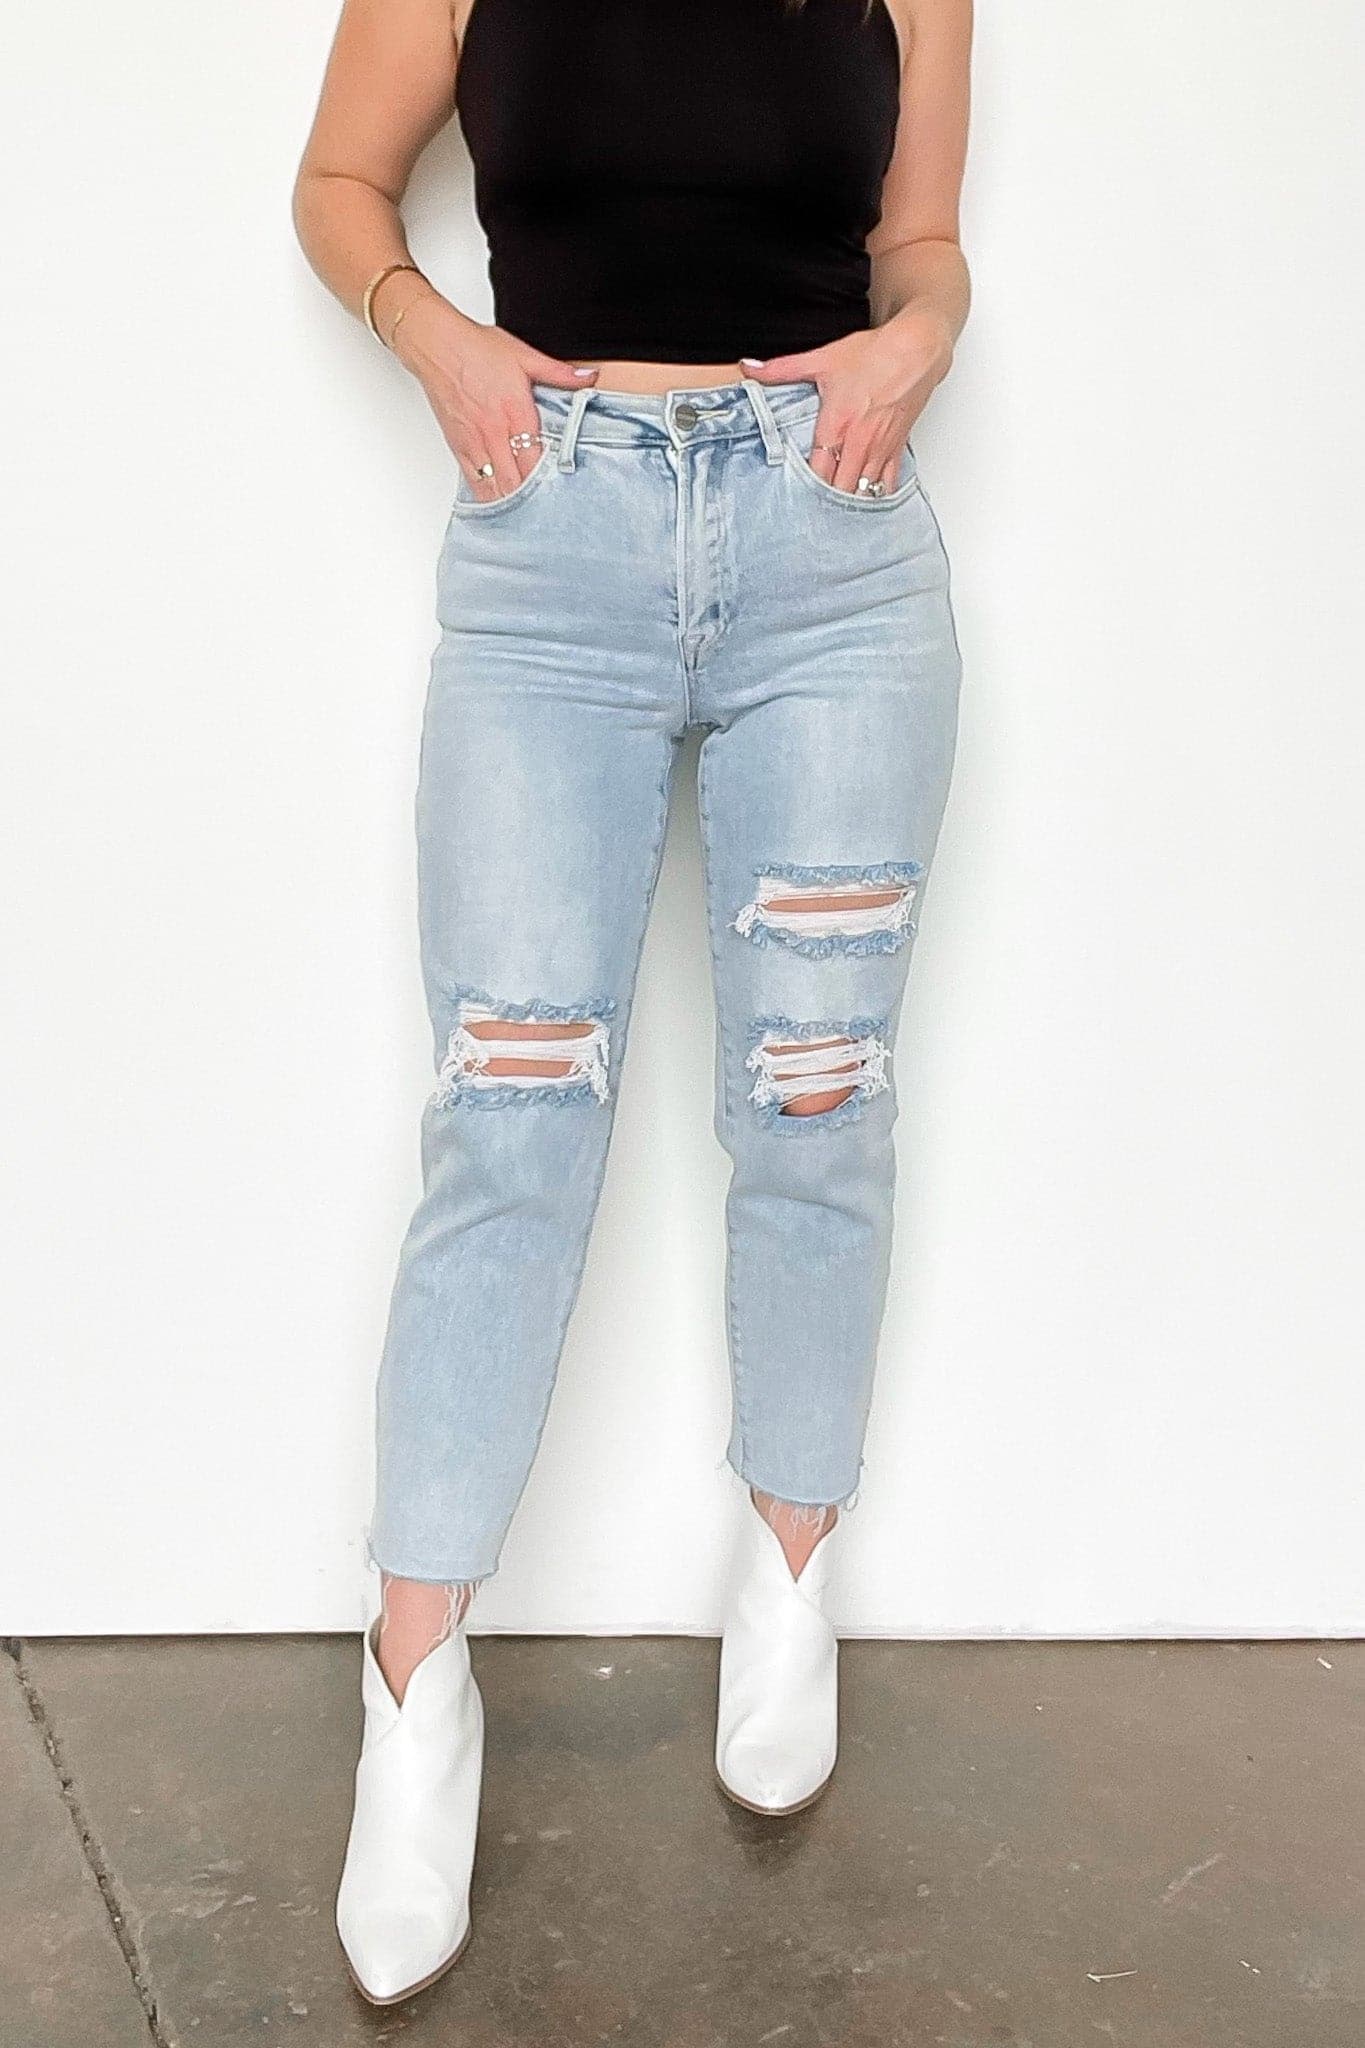 1 / Light Dustin High Rise Distressed Boyfriend Jeans - Madison and Mallory